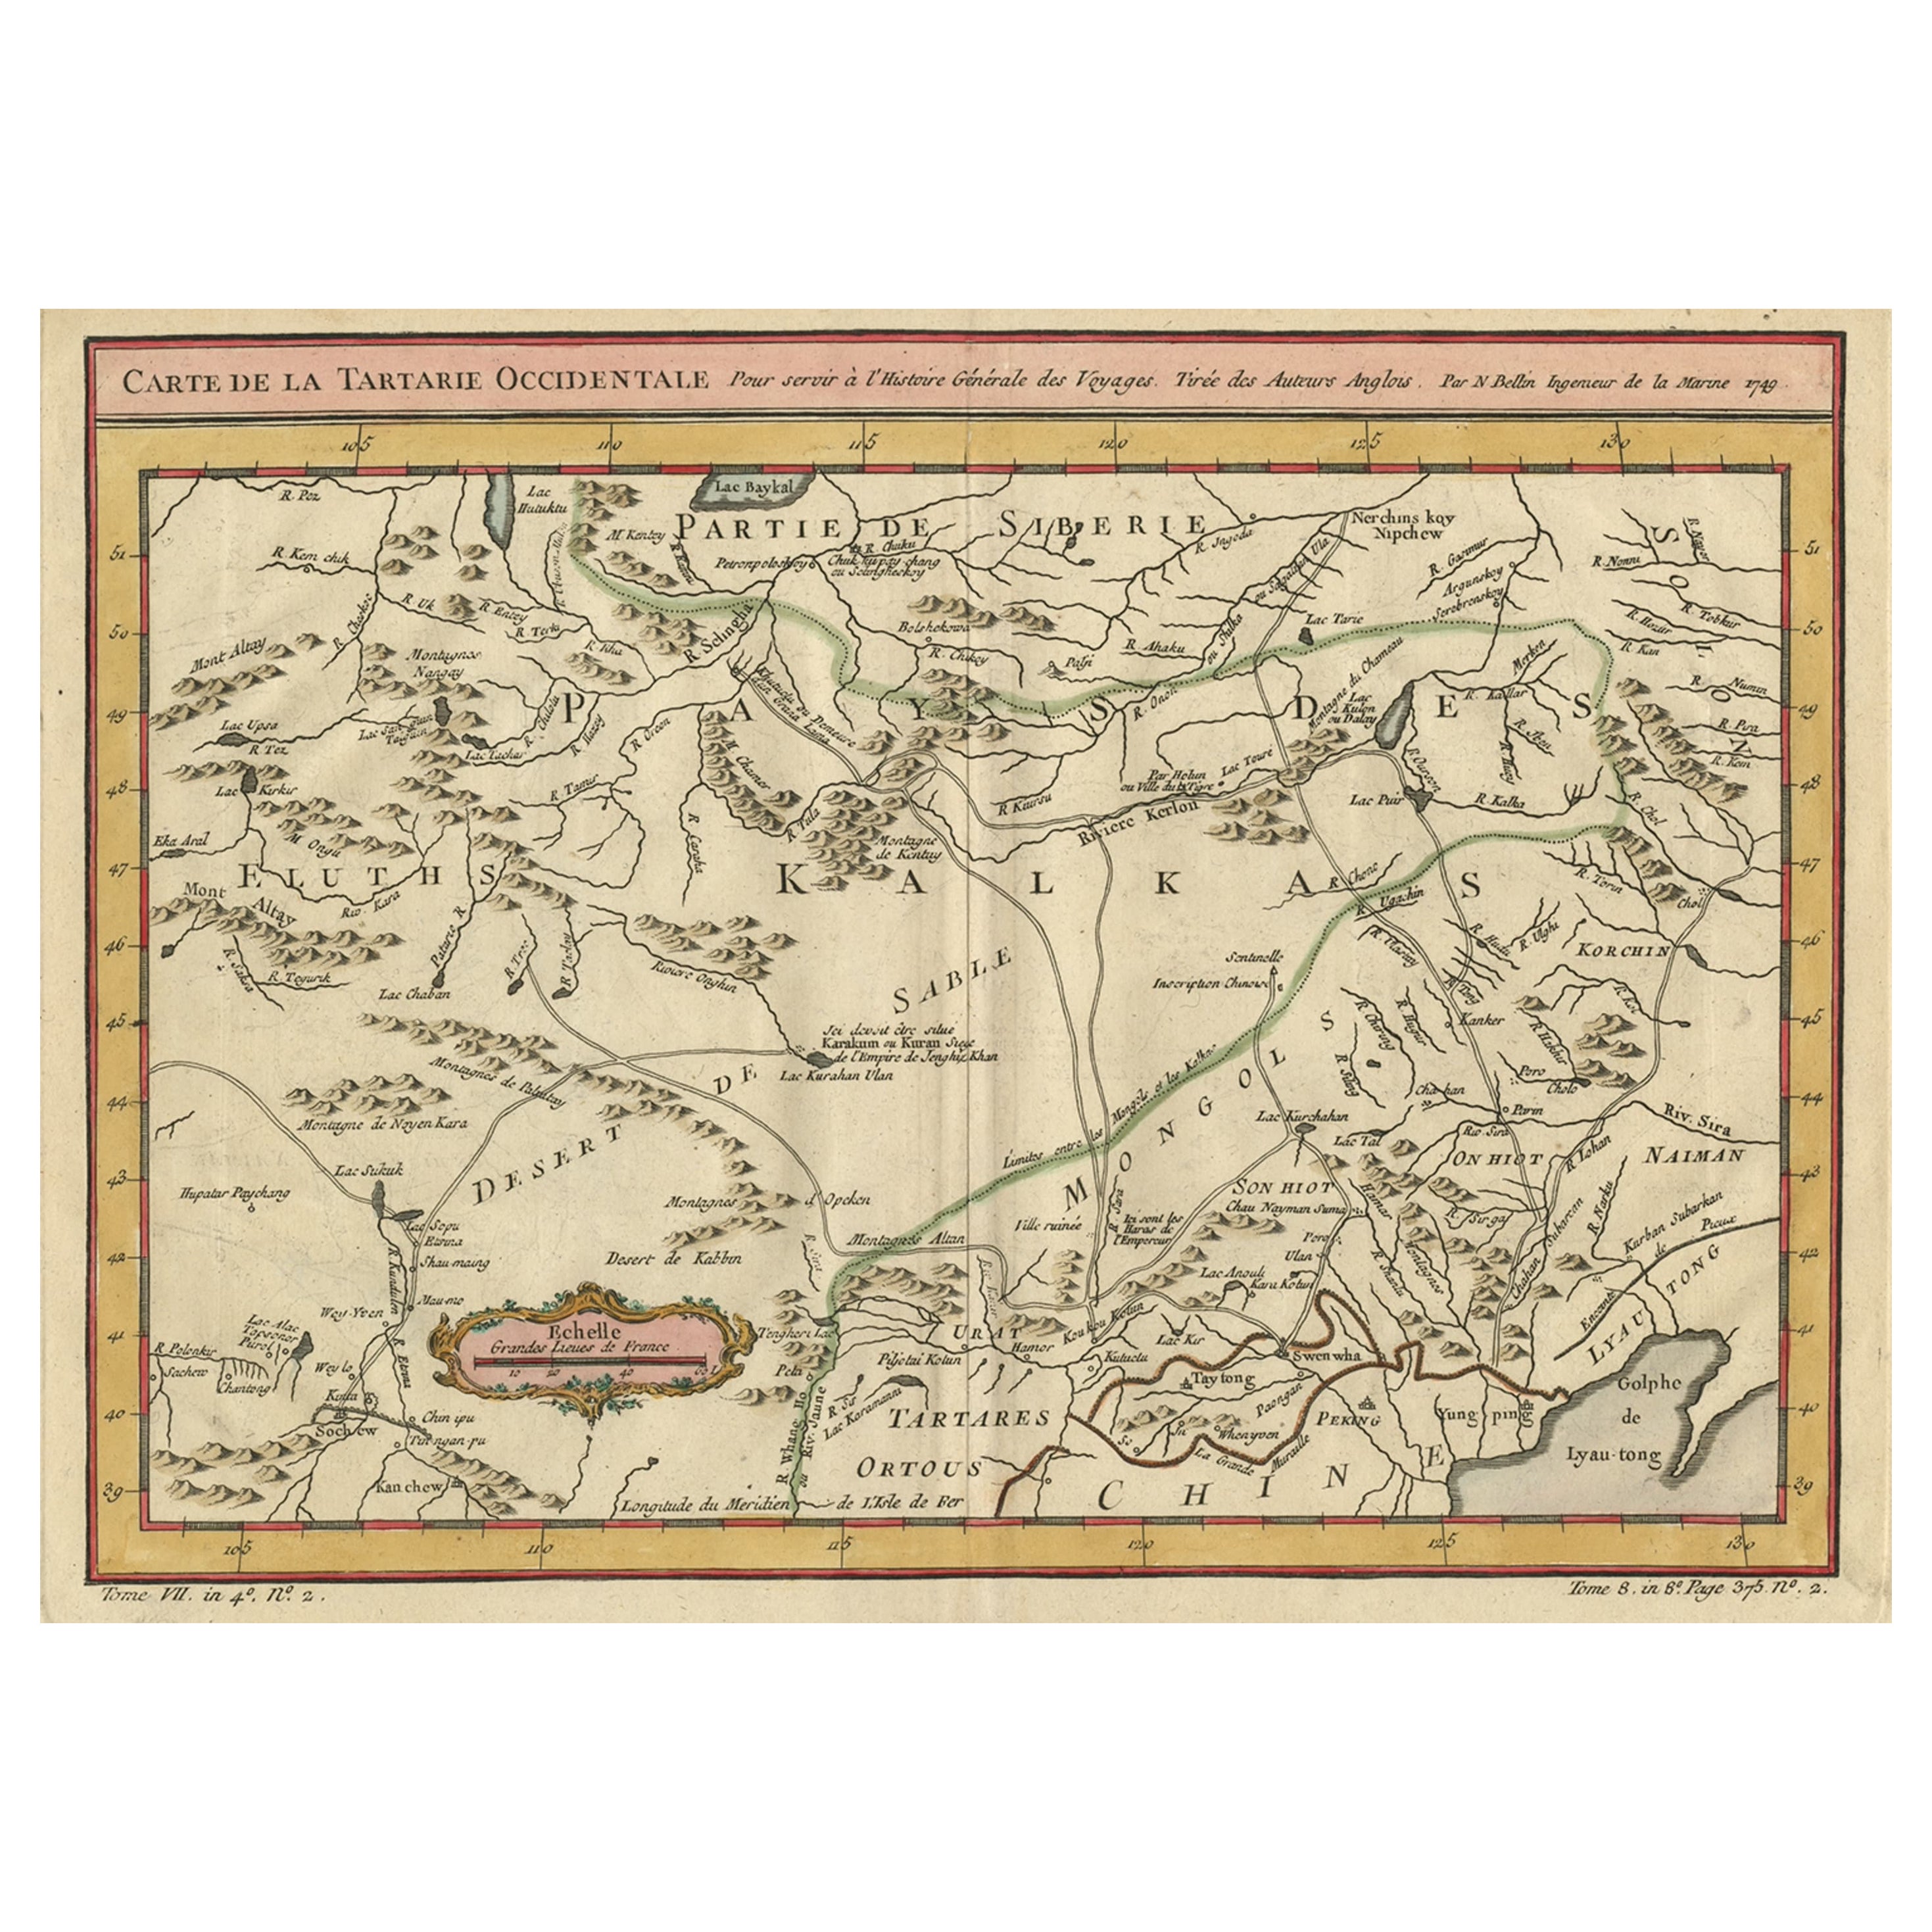 Old Hand-Colored Map of Western Tartary with Focus on Present-Day Mongolia, 1749